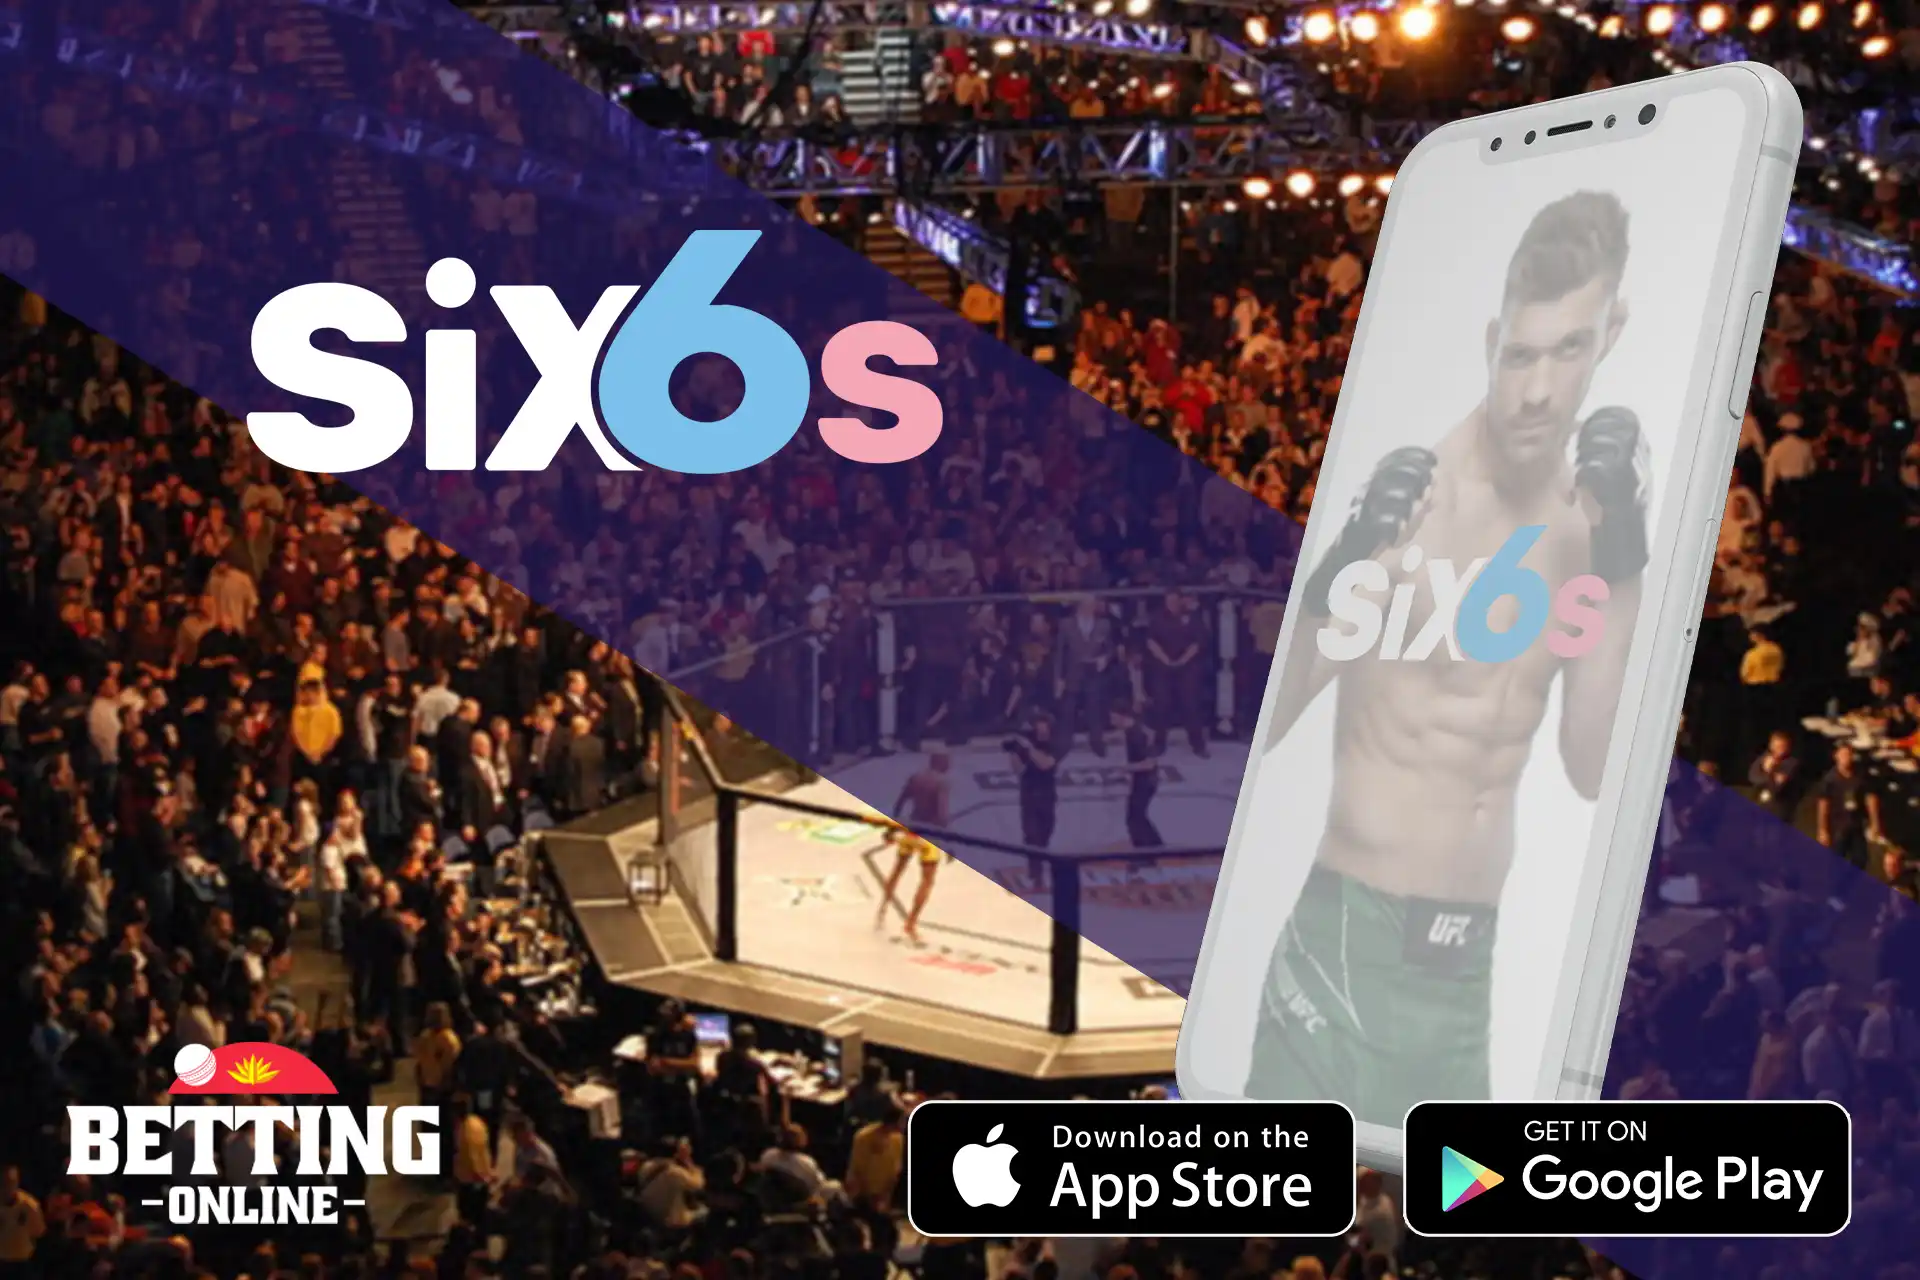 Bet on the UFC from the mobile version of the Six6s website or app.